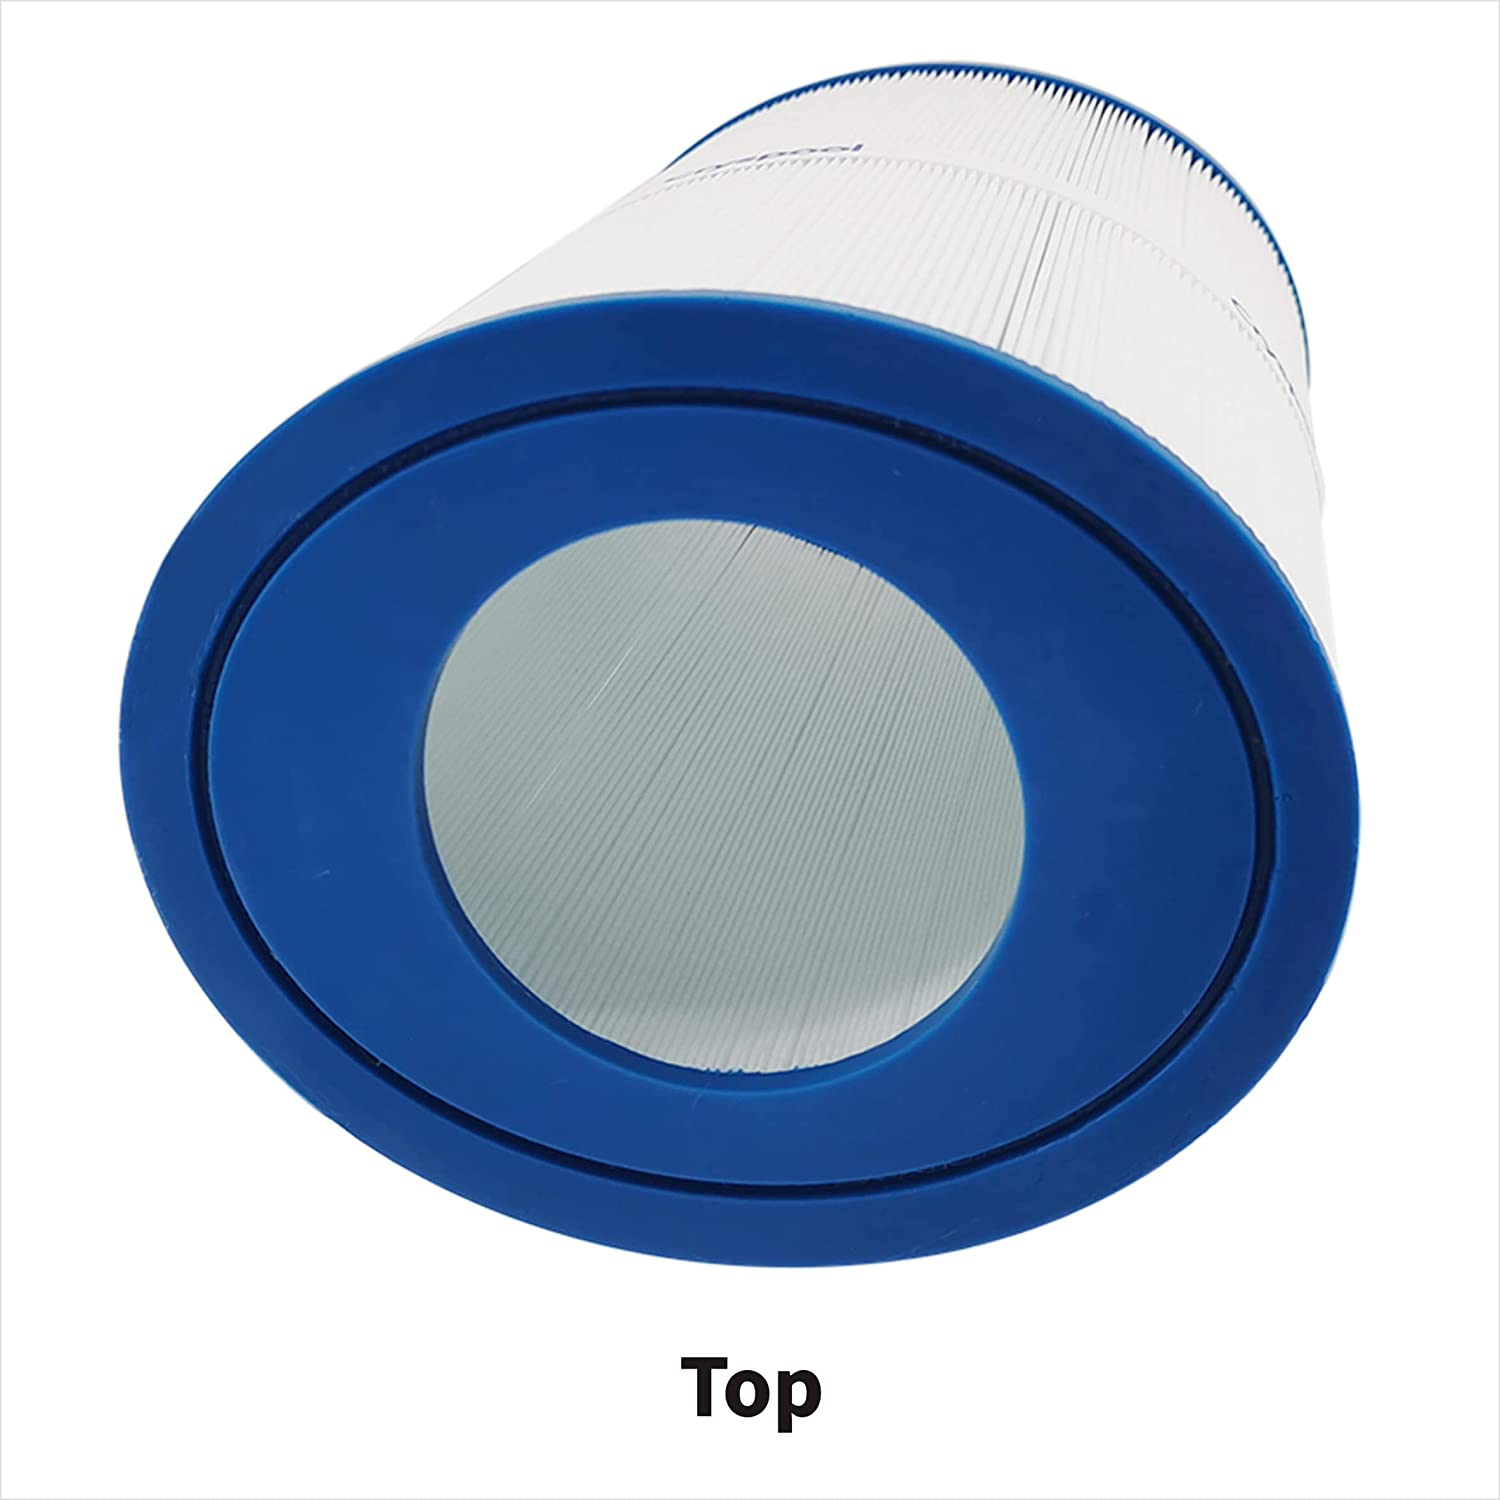 Cryspool CP030 Hot Tub Spa Filter Compatible with Pleatco PDM30, Dream Maker 461269 Featured Image